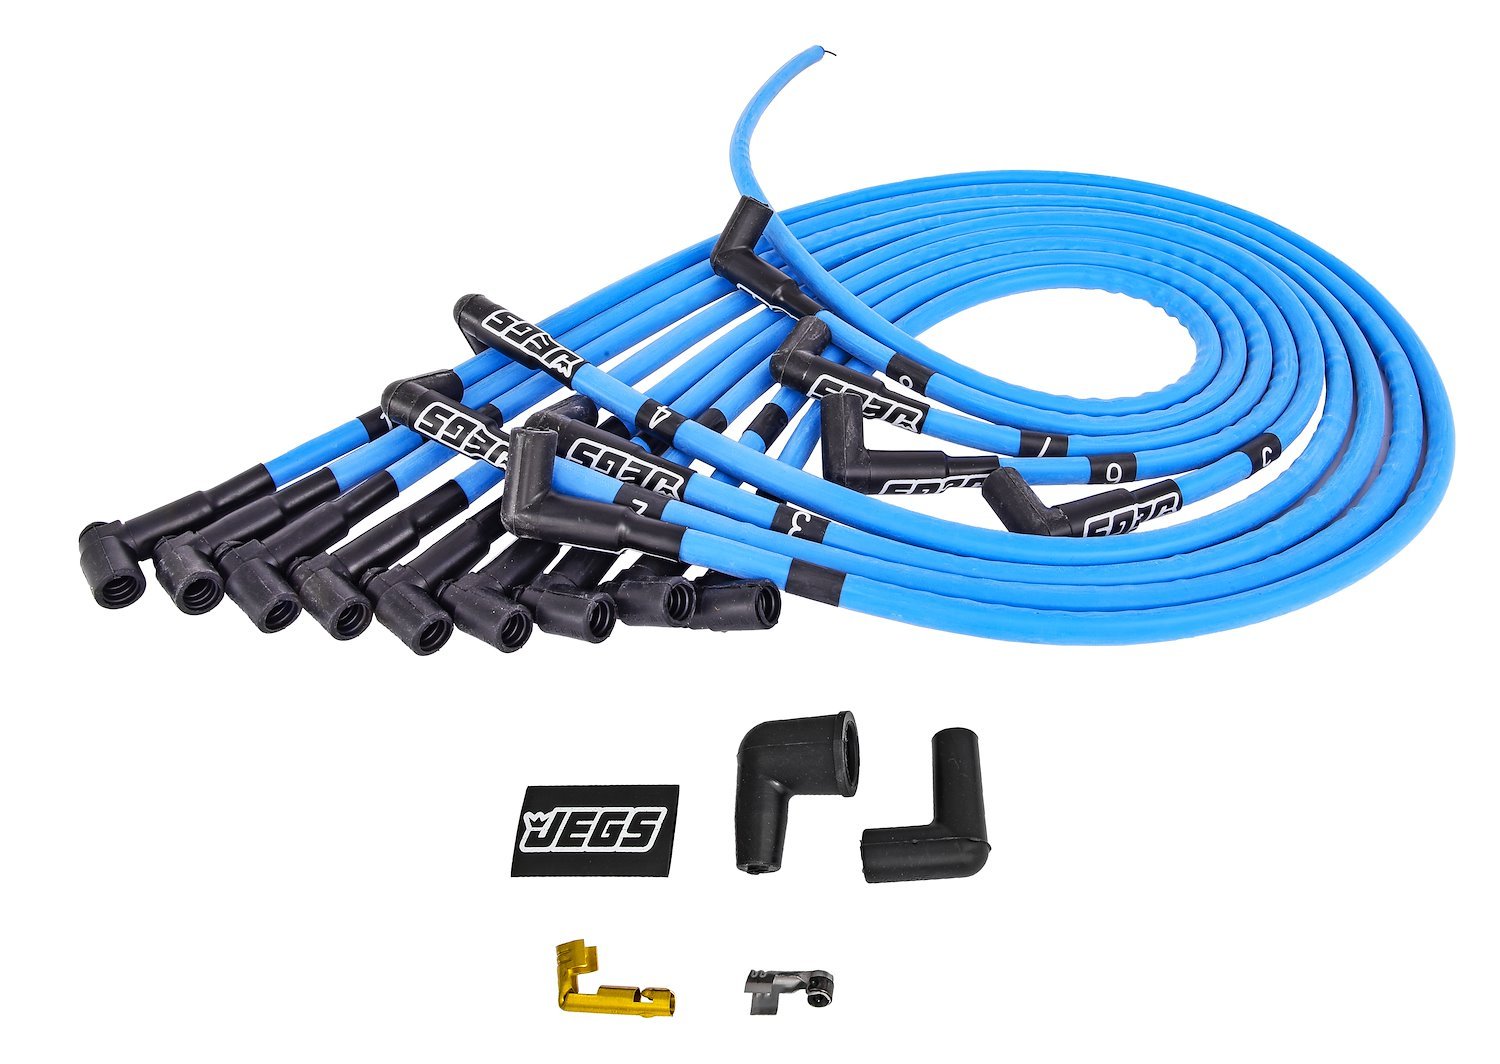 JEGS 555-40293: Hi-Temp Sleeved Spark Plug Wire Set, Fits Small Block  Chevy 262-400 w/HEI Distributor, 8 mm Blue, Over Valve Cover Design, 90- degree HEI Distributor Boots